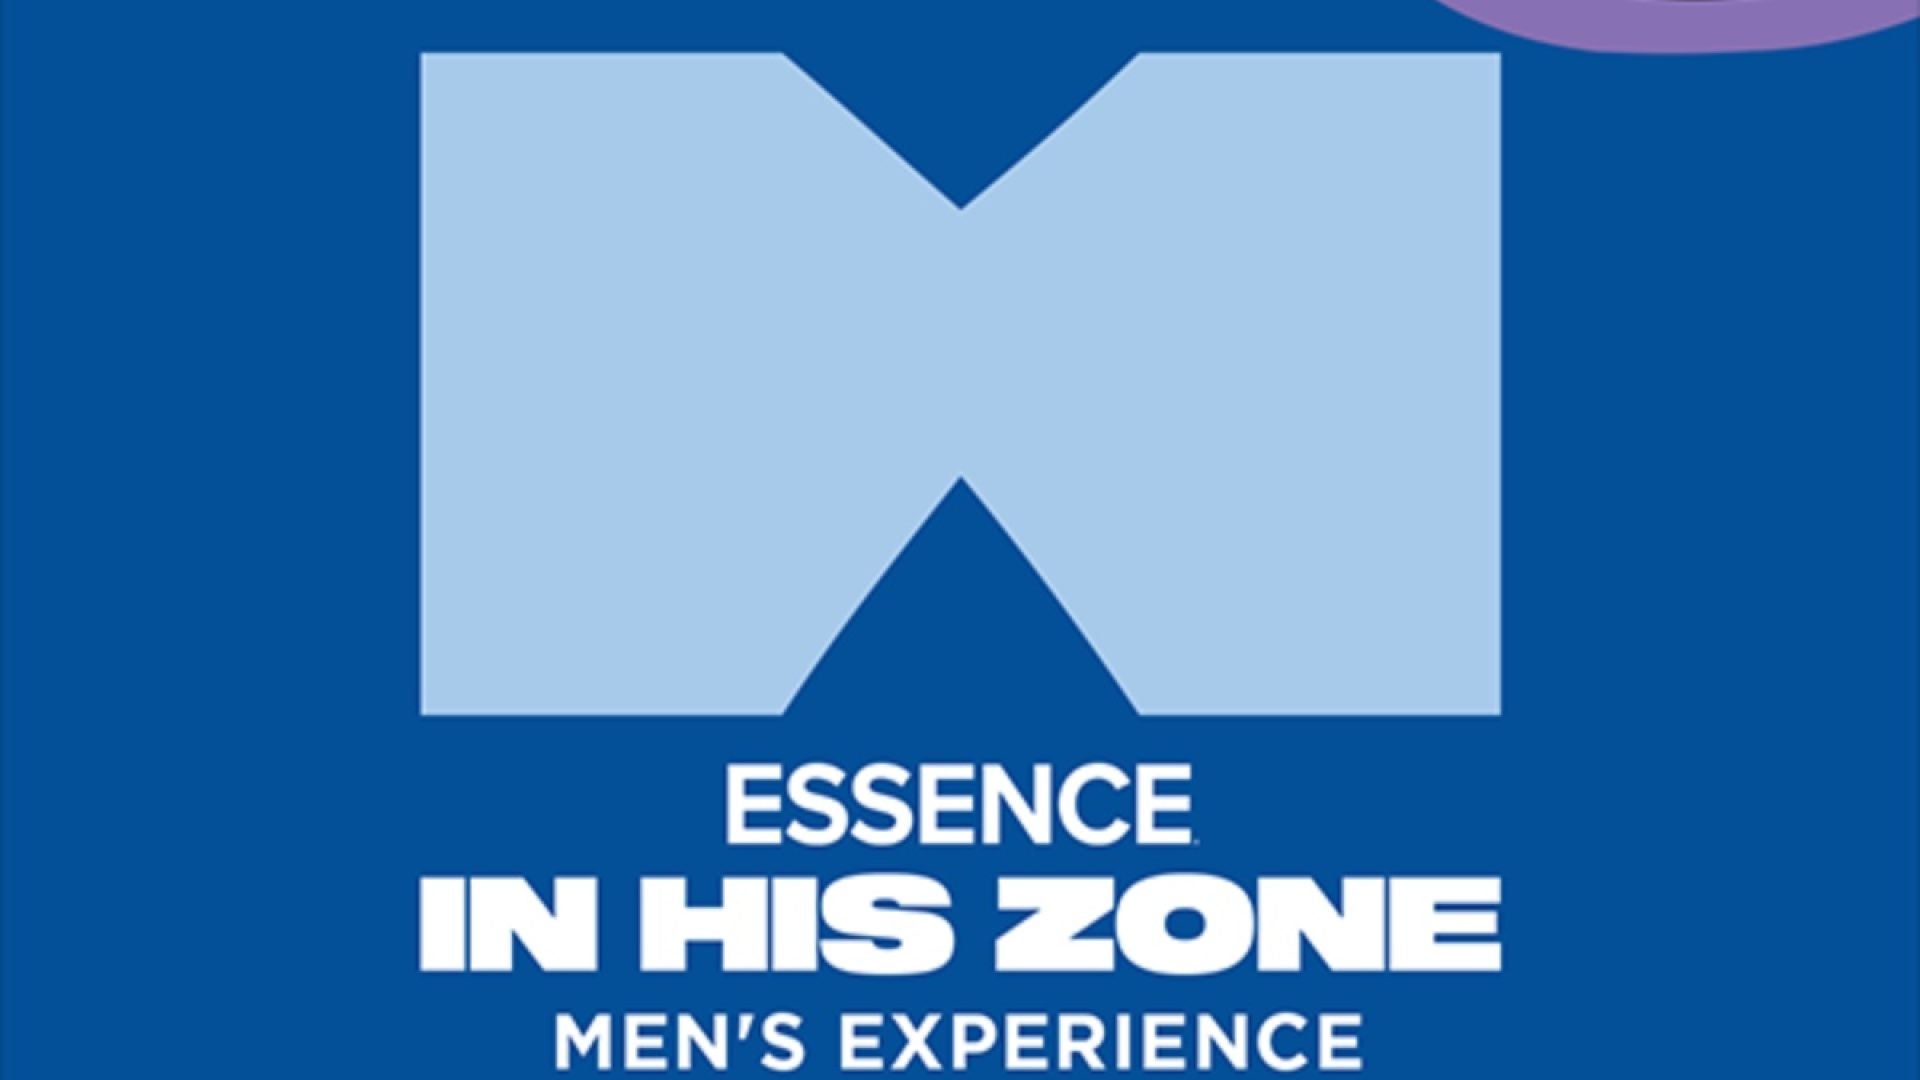 Here’s What You Can Expect At The ESSENCE Festival In His Zone Experience!